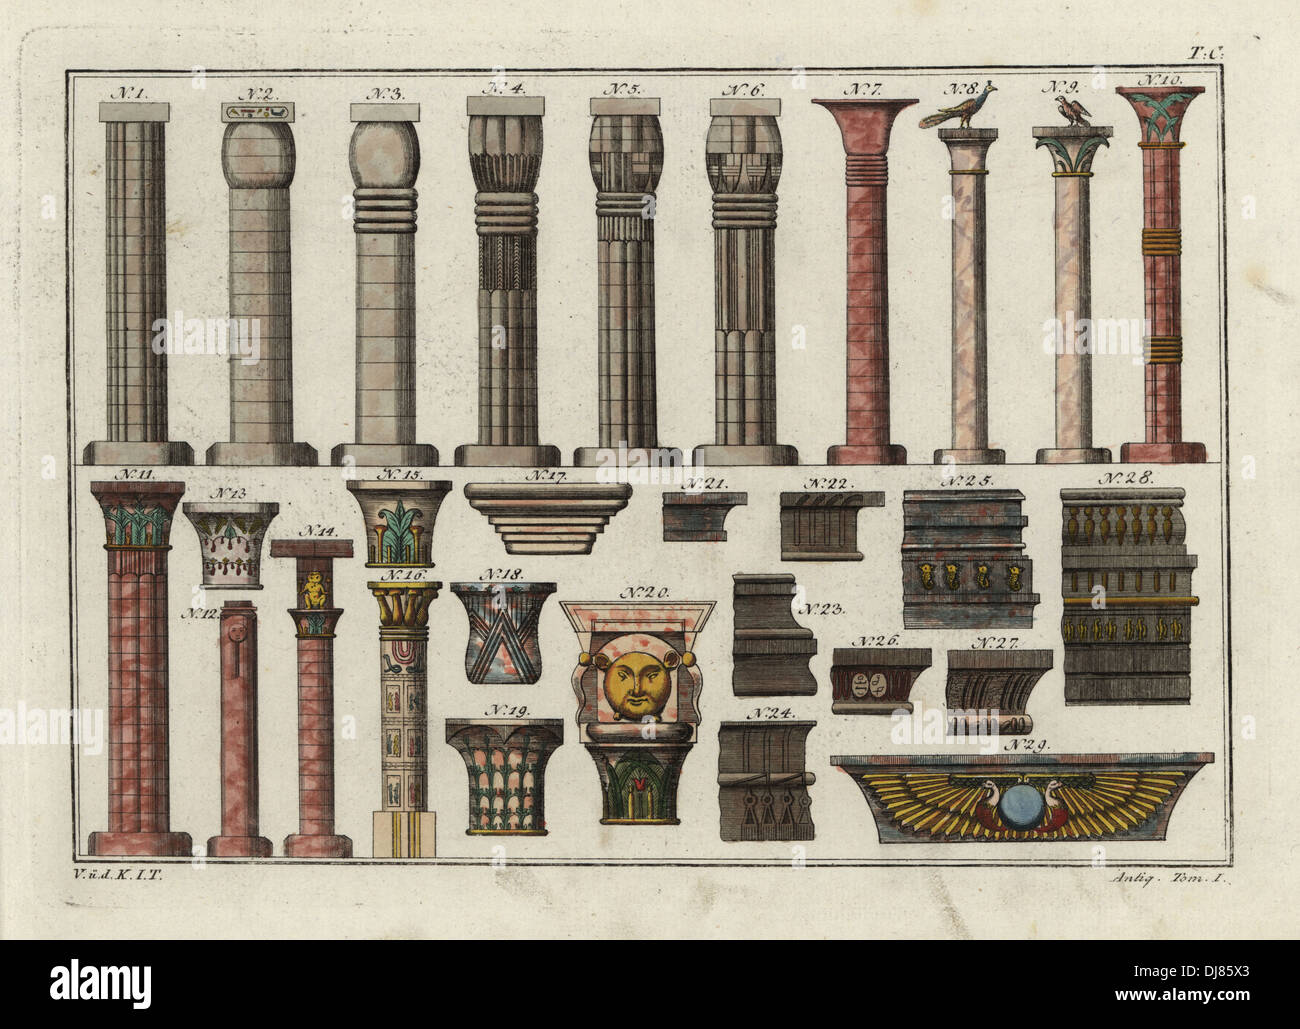 Egyptian columns (1-12, 16) from Luxor (2, 5) and Karnak (3, 6), and capitals (13-20), cornices (21-28) and door ornament (29). Stock Photo